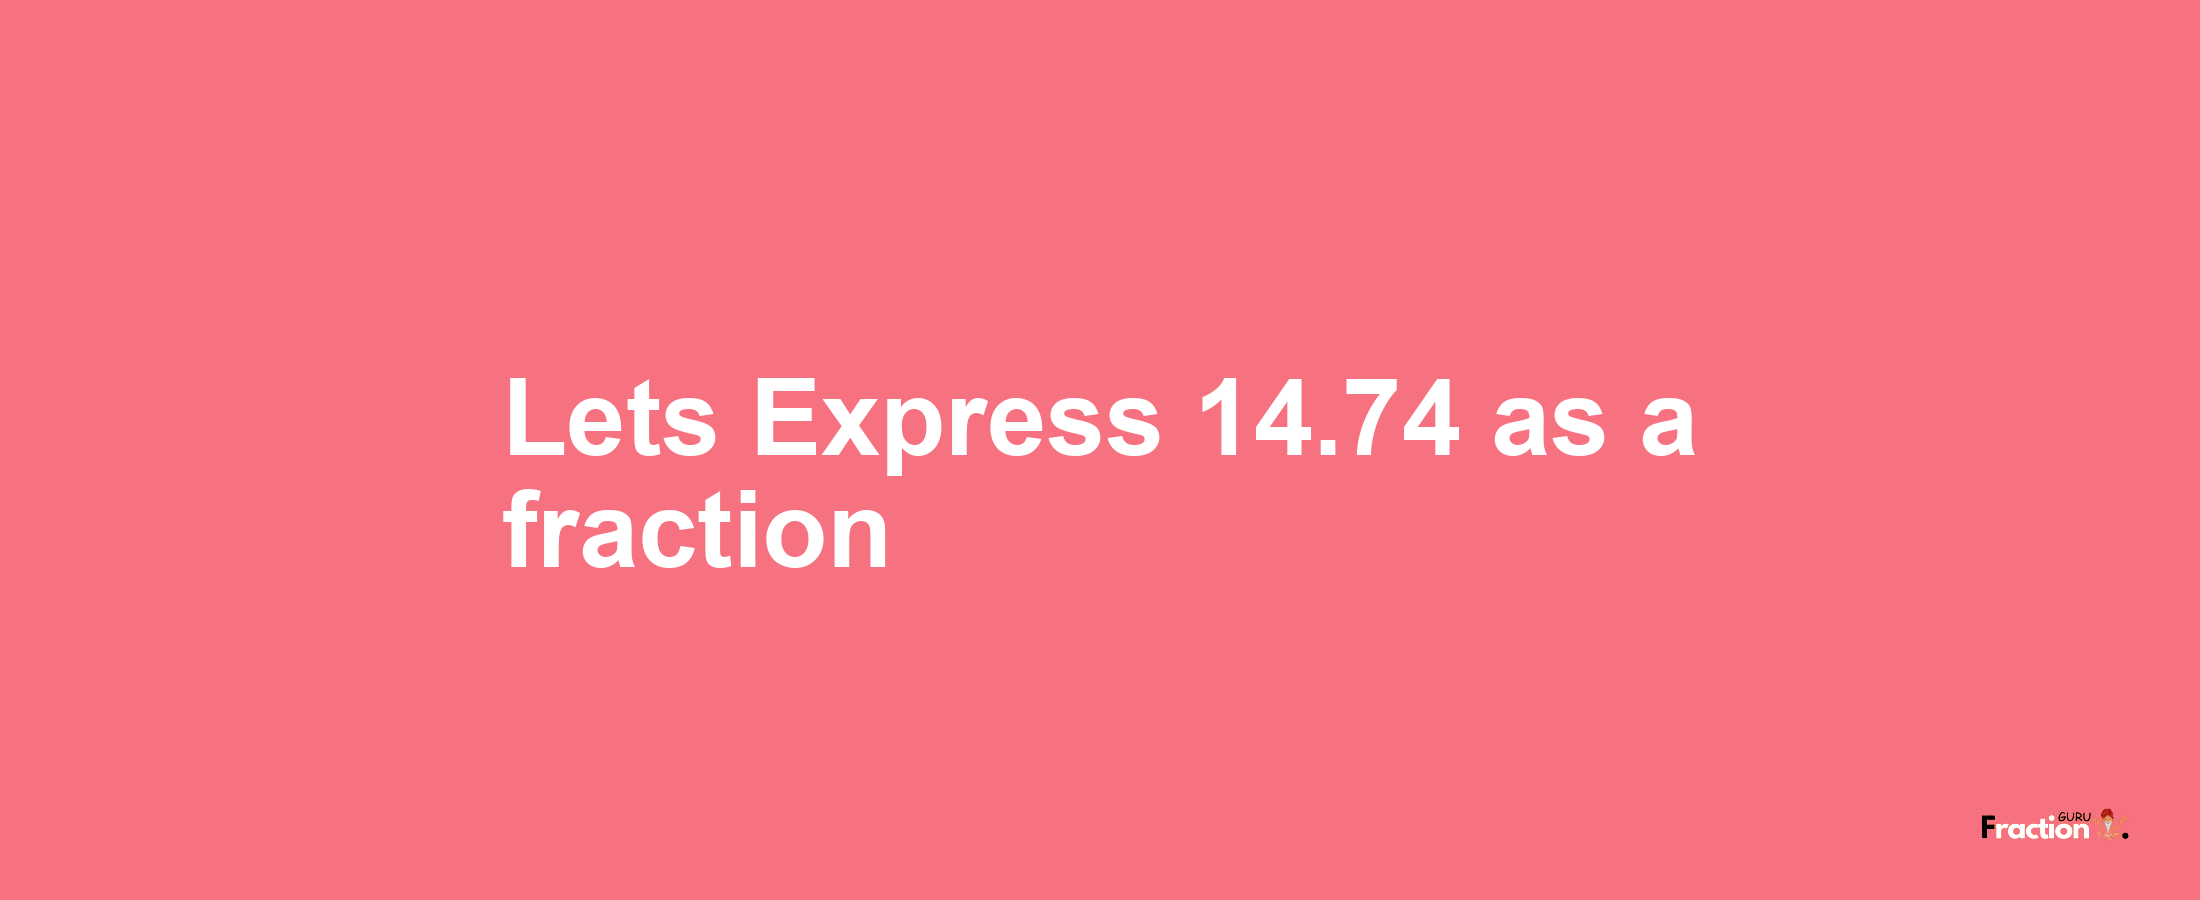 Lets Express 14.74 as afraction